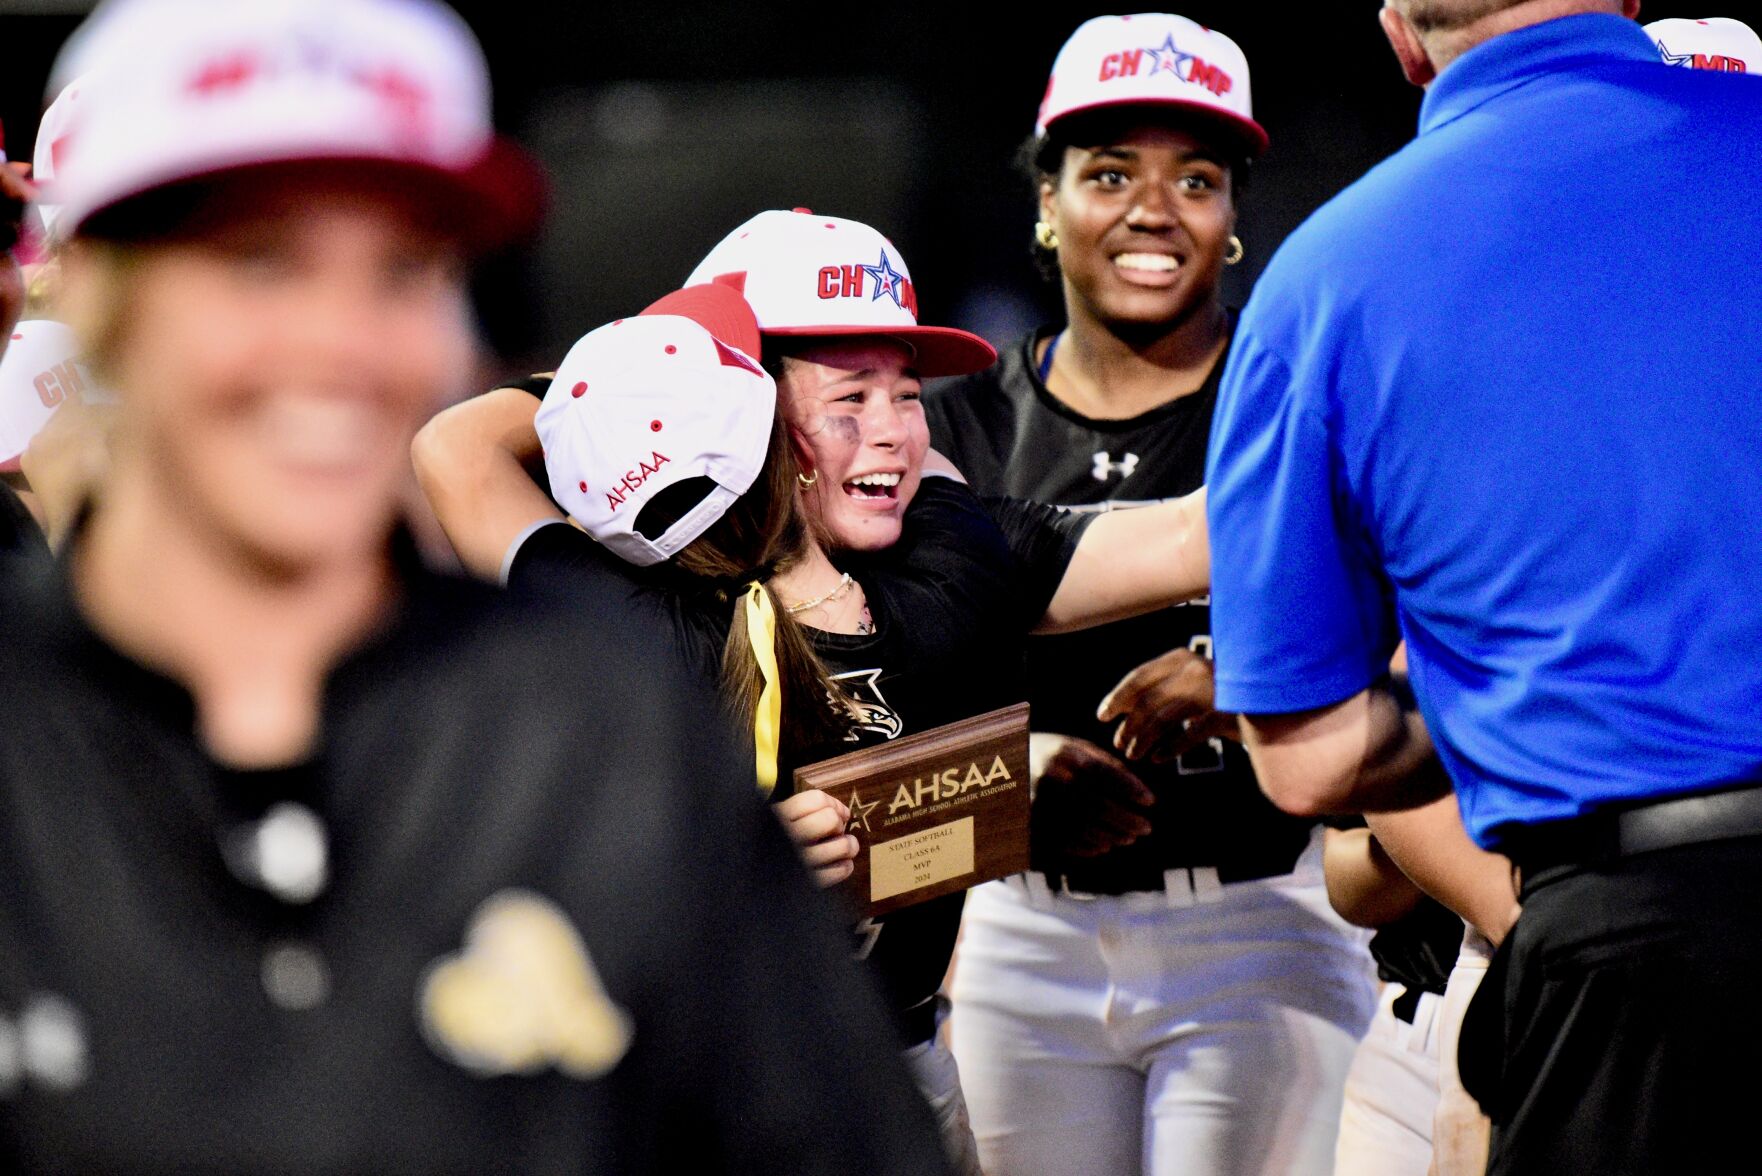 Athens Softball Team Triumphs over Hartselle for Class 6A Title with MVP Carly Ennis